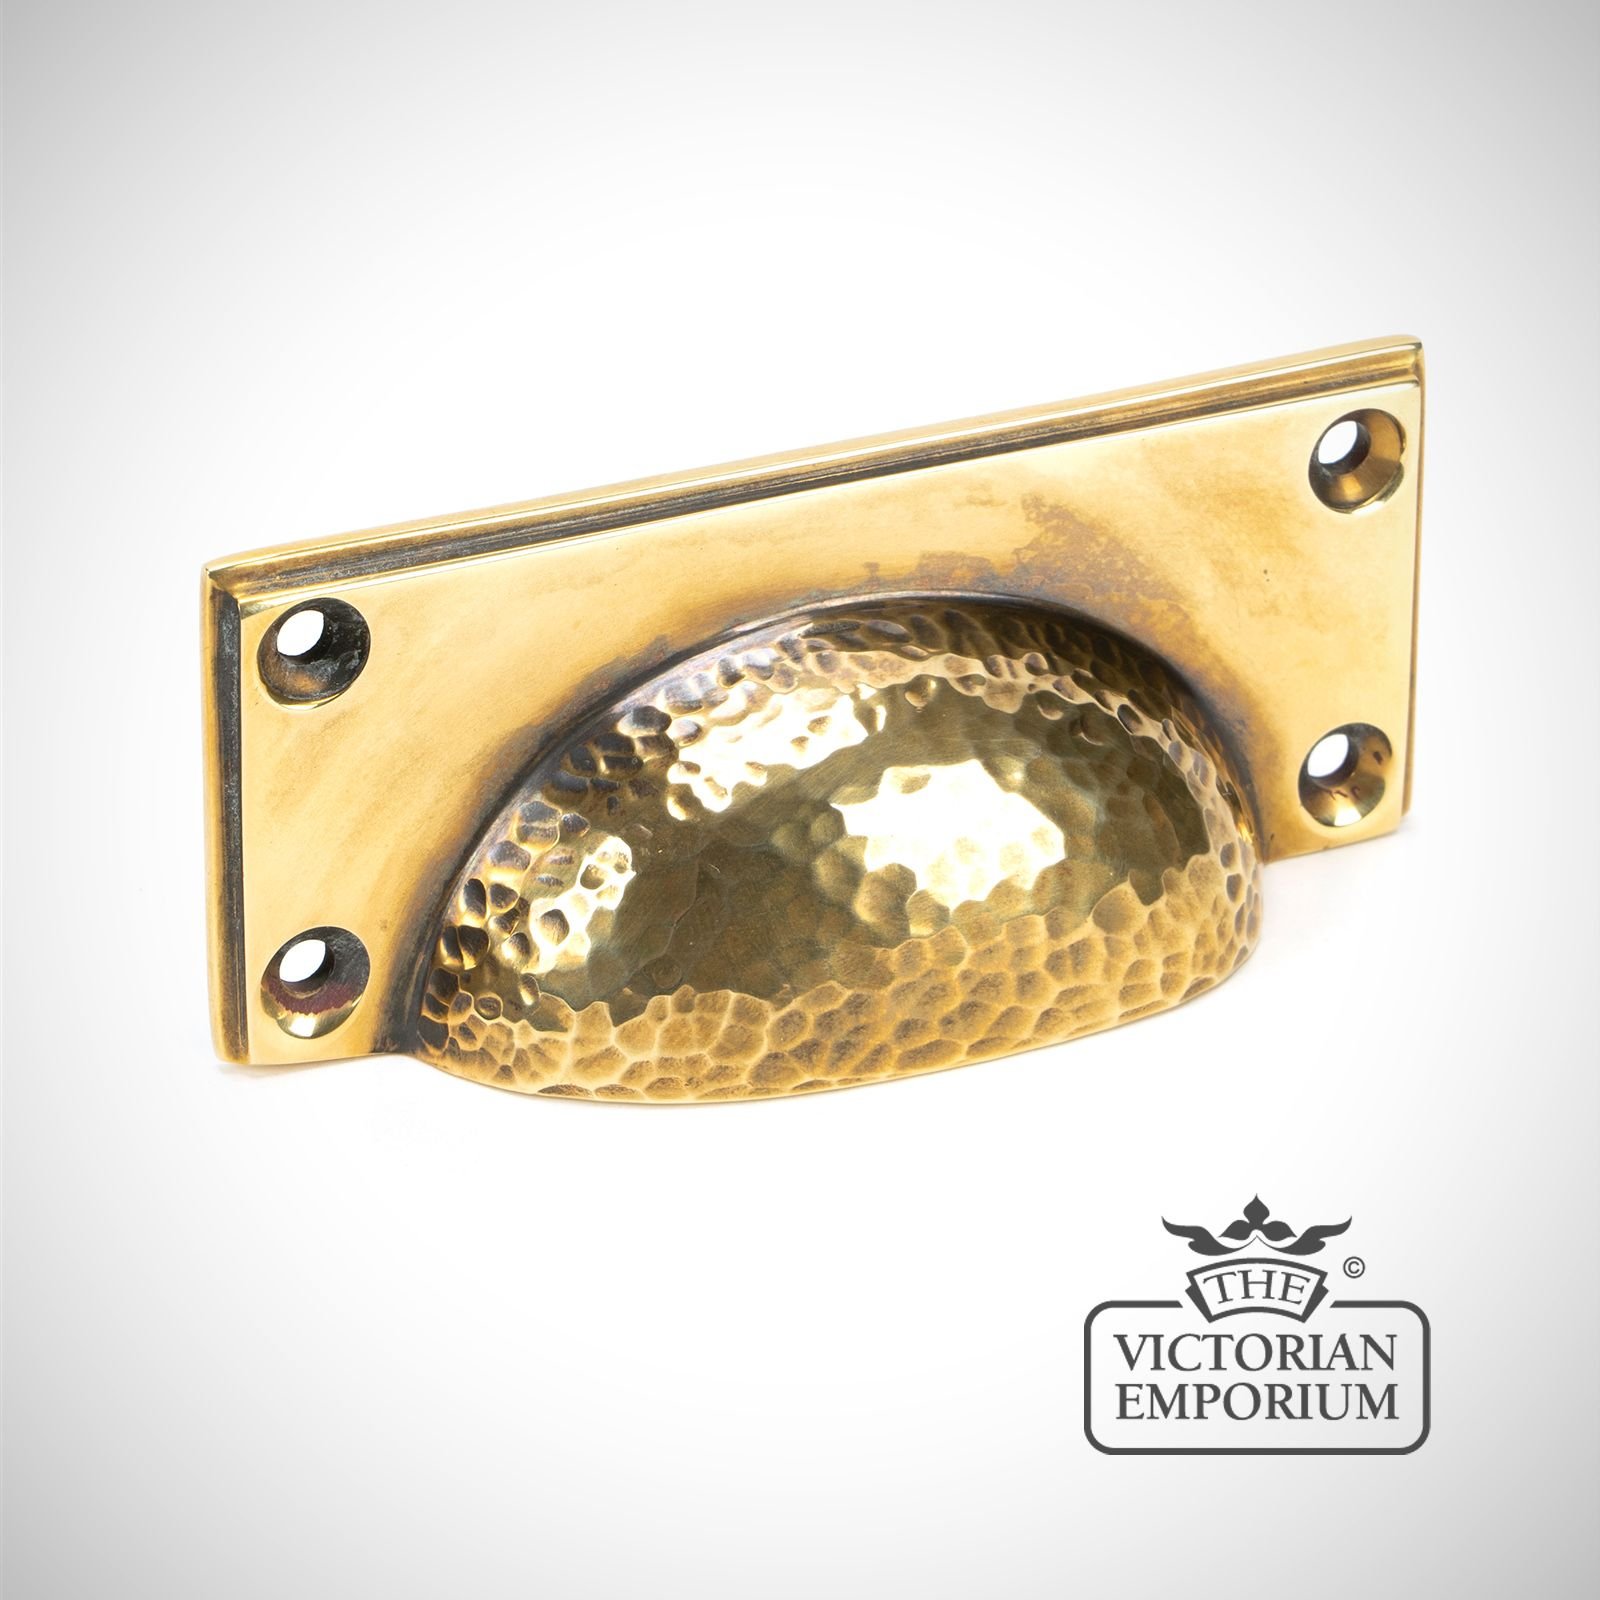 Hammered pull handle in aged brass